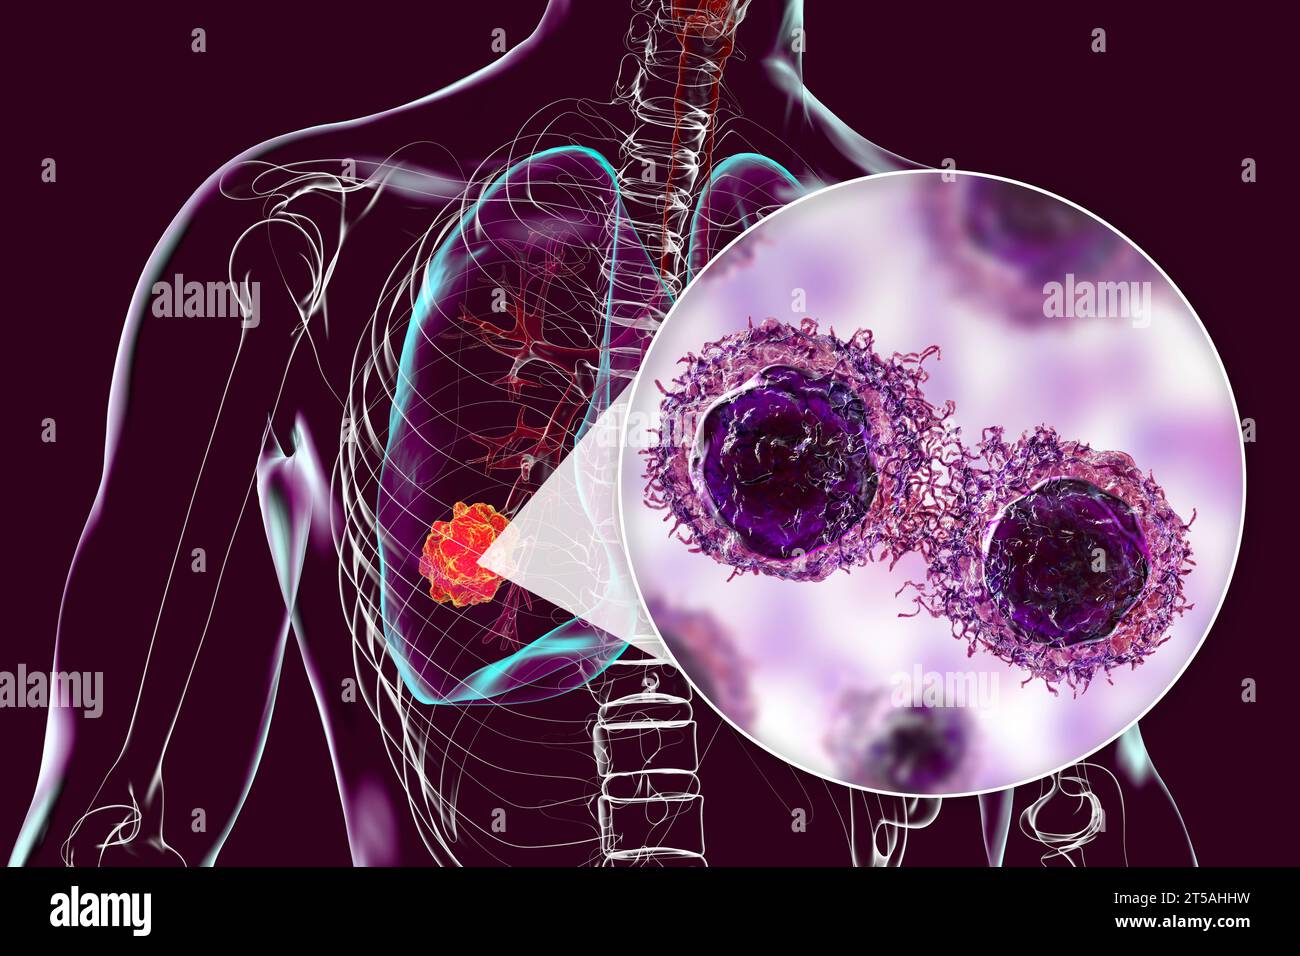 Lung cancer tumour and malignant cells, illustration Stock Photo